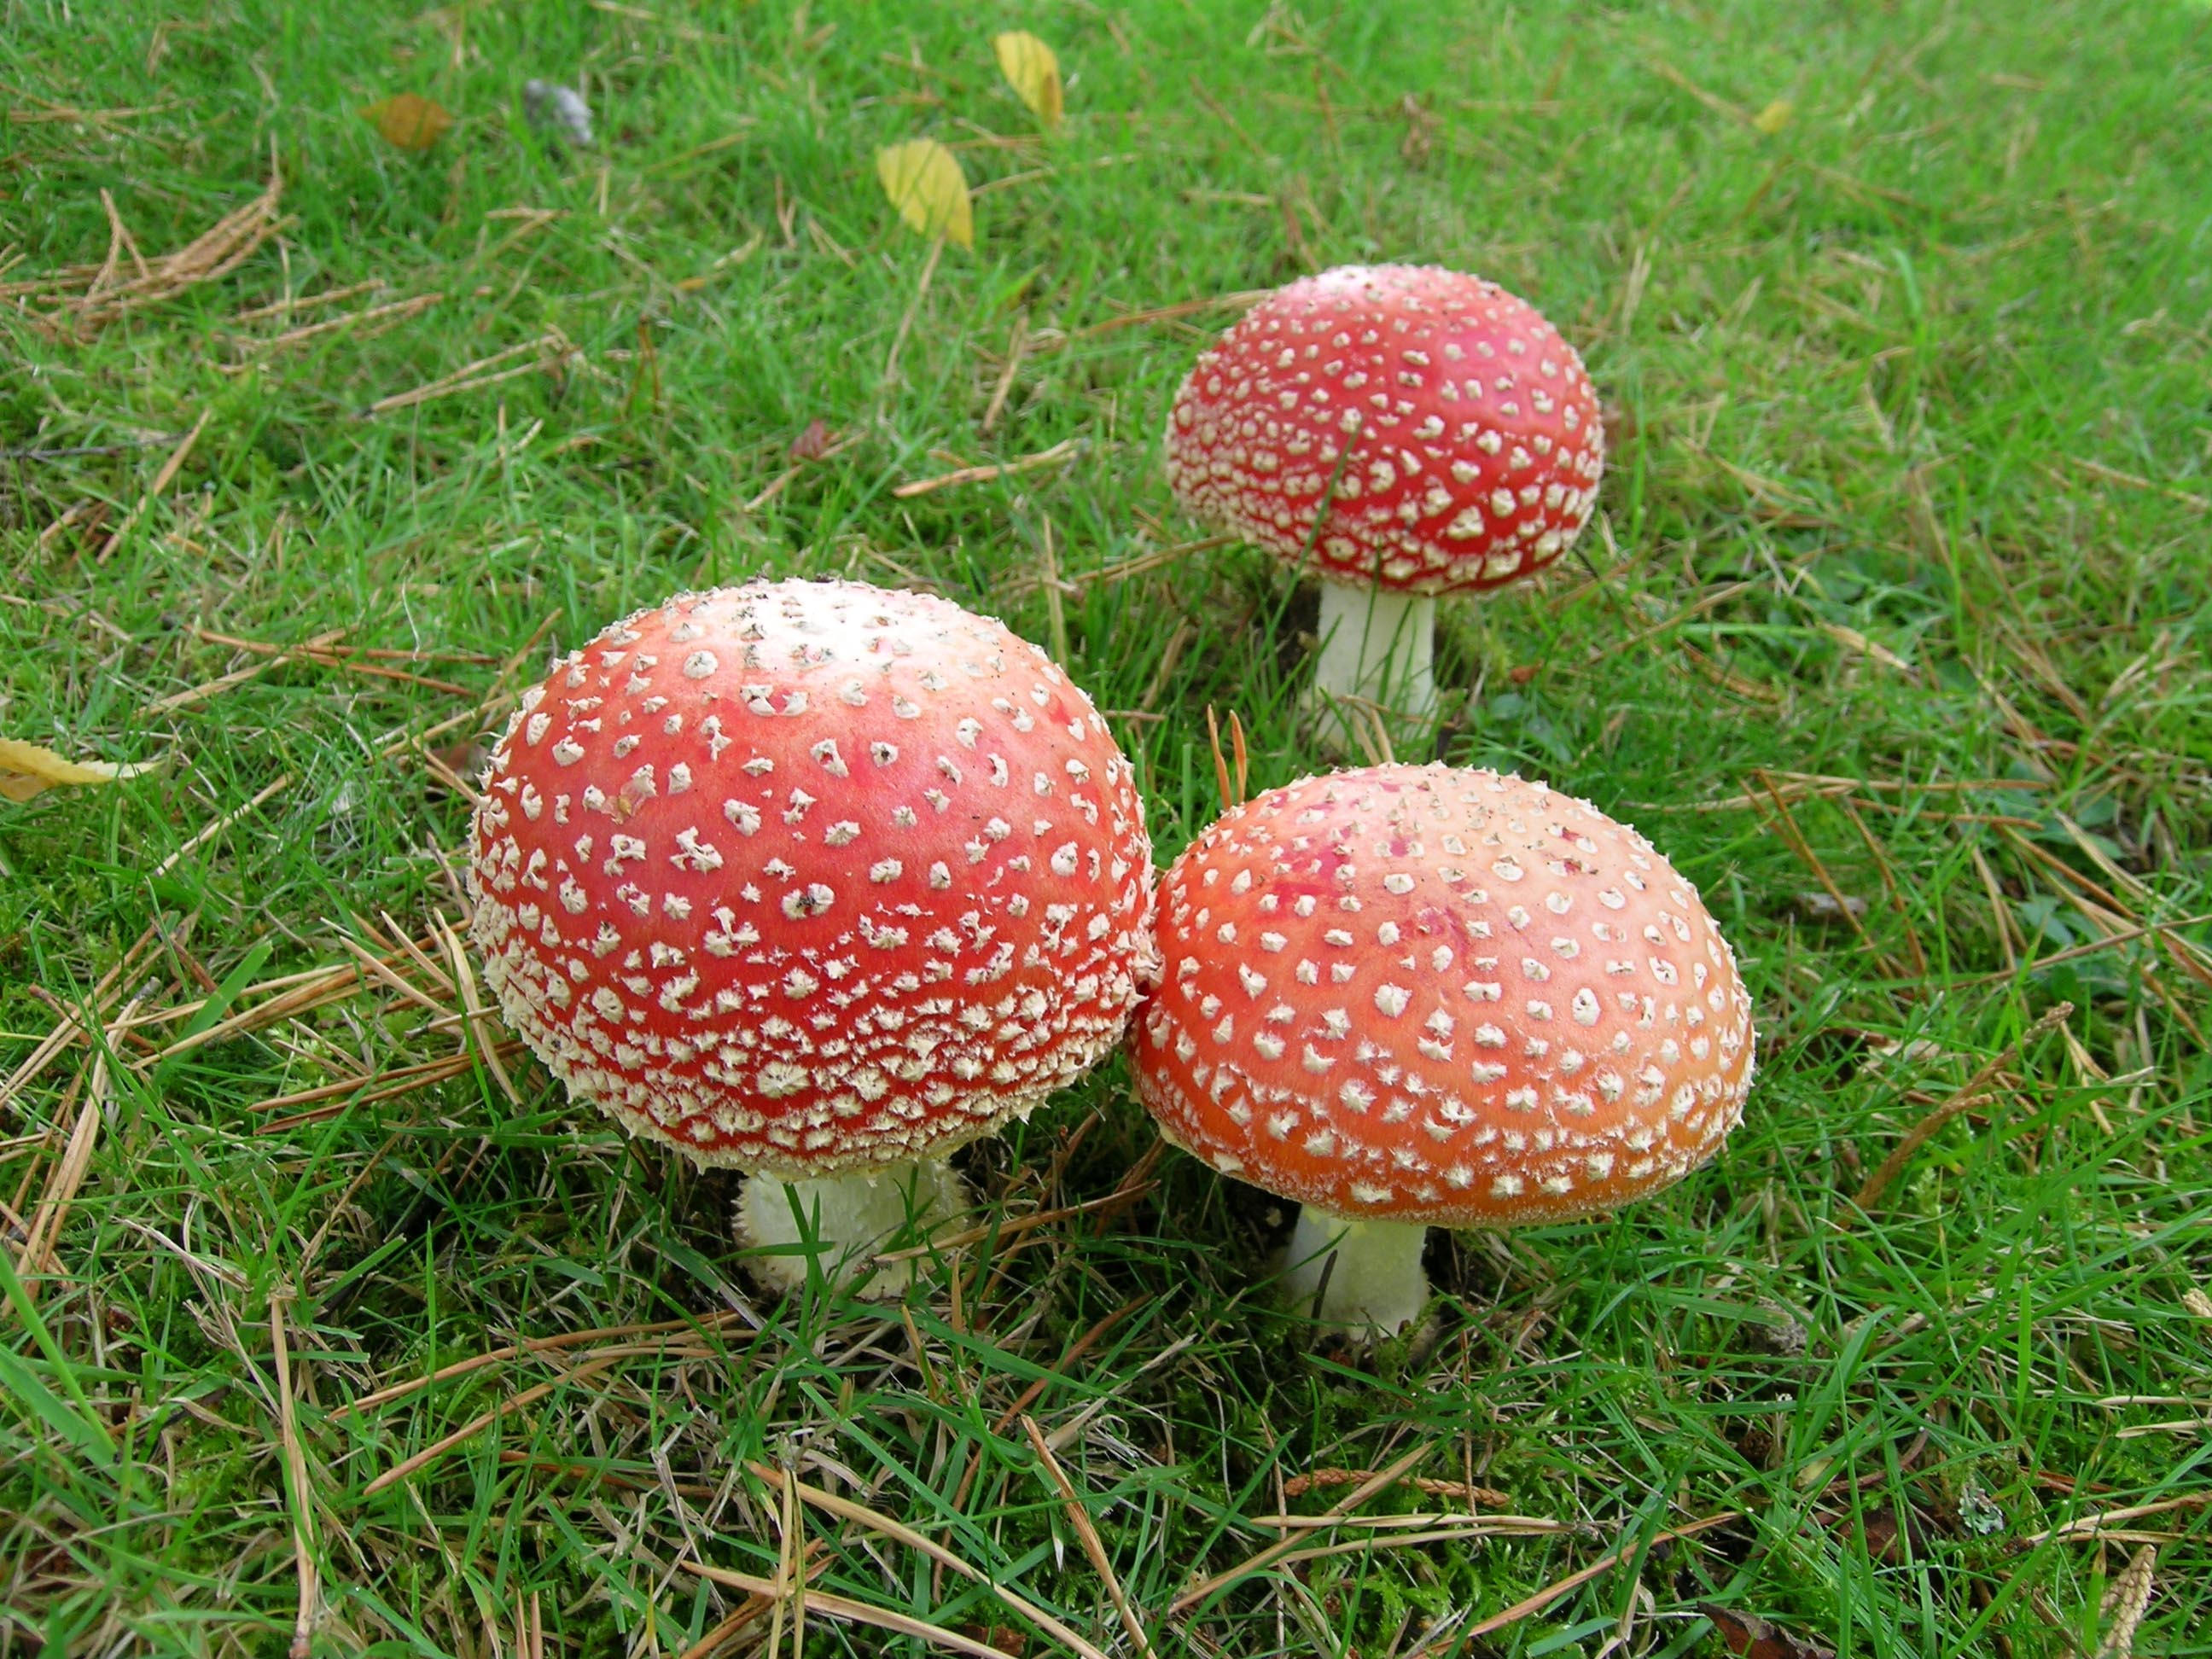 Fly agaric growing among grass